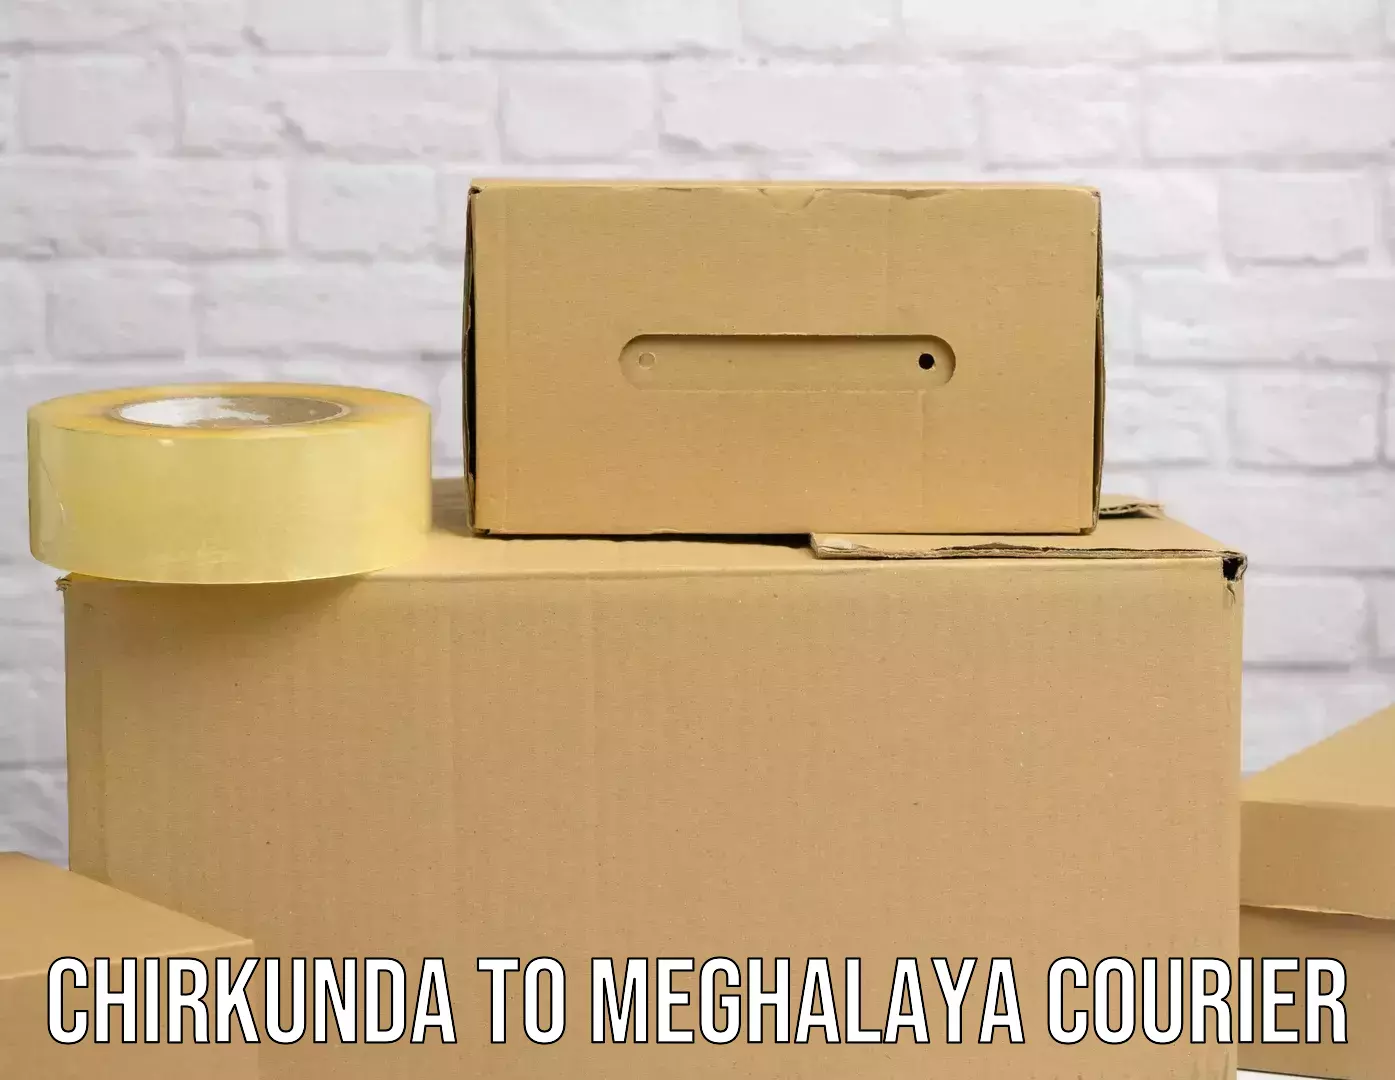 Sustainable shipping practices in Chirkunda to Meghalaya